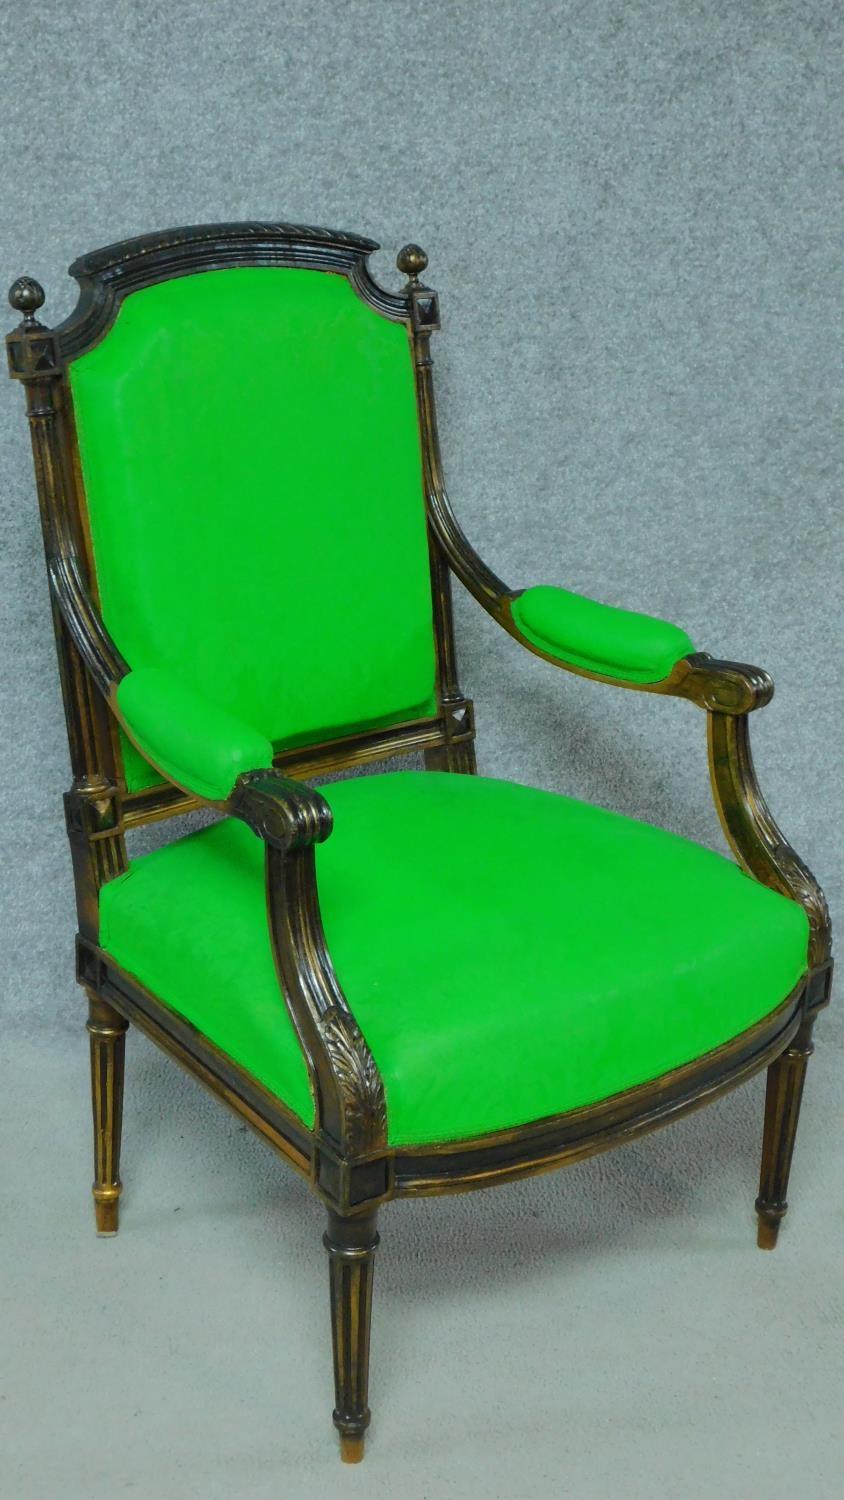 A 19th century French walnut armchair in vibrant green fabric painted upholstery. H.98cm - Image 2 of 4